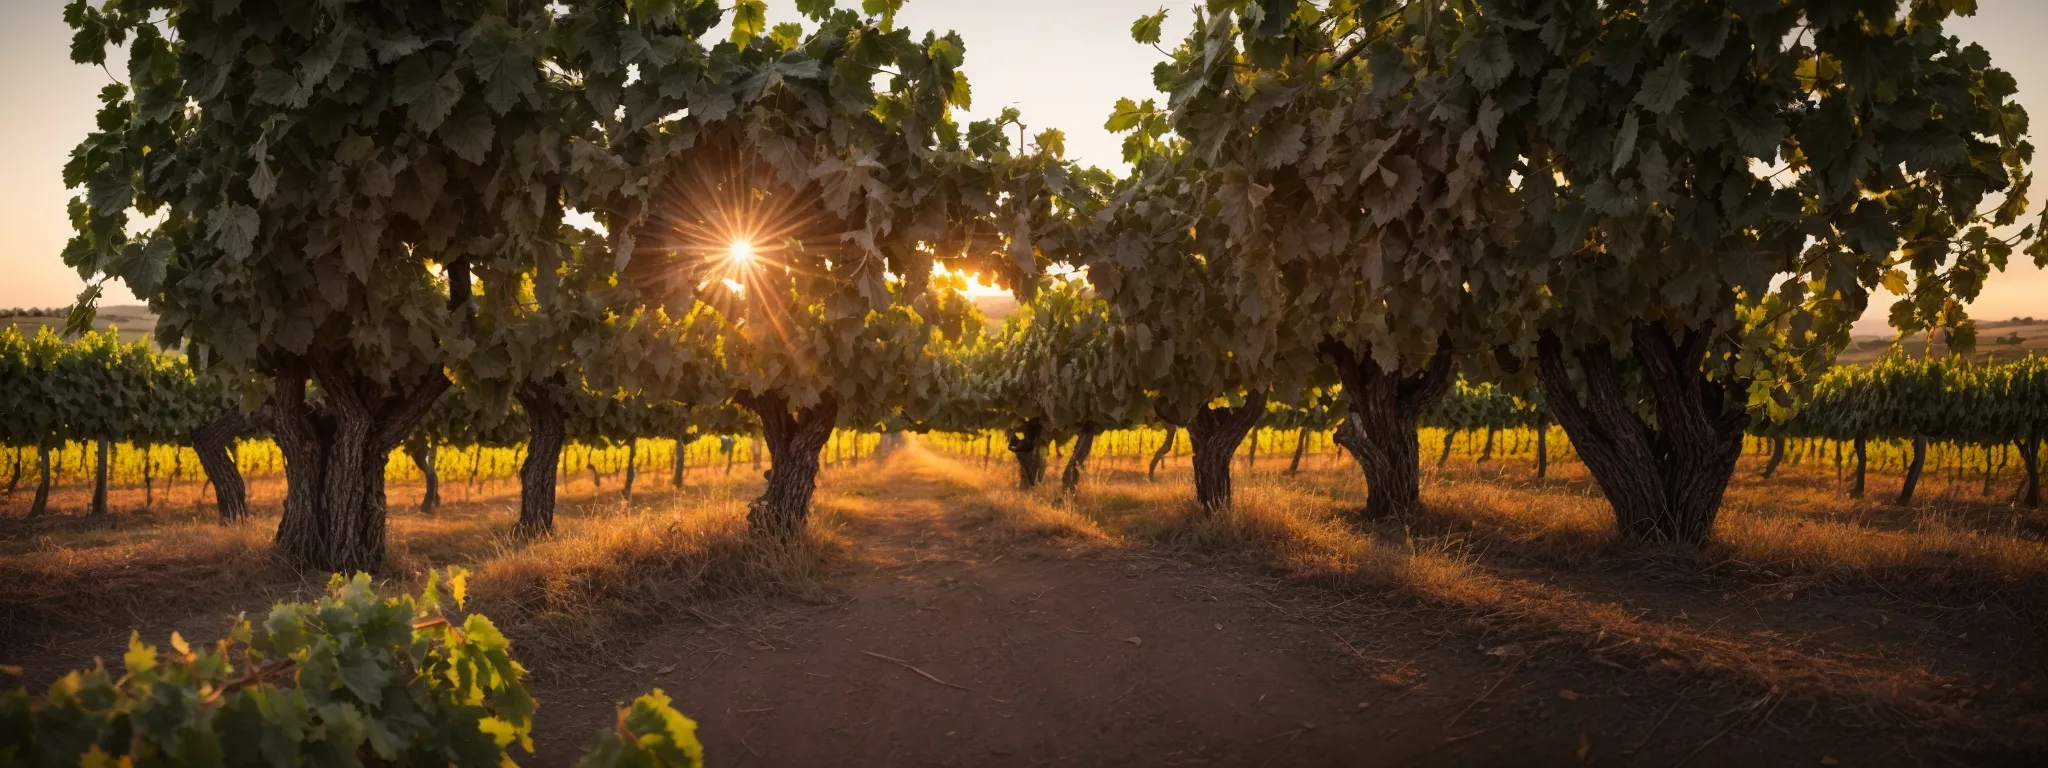 a vineyard at sunset with rows of grapevines stretching into the horizon, symbolizing the rich tradition and storytelling within the wine industry.